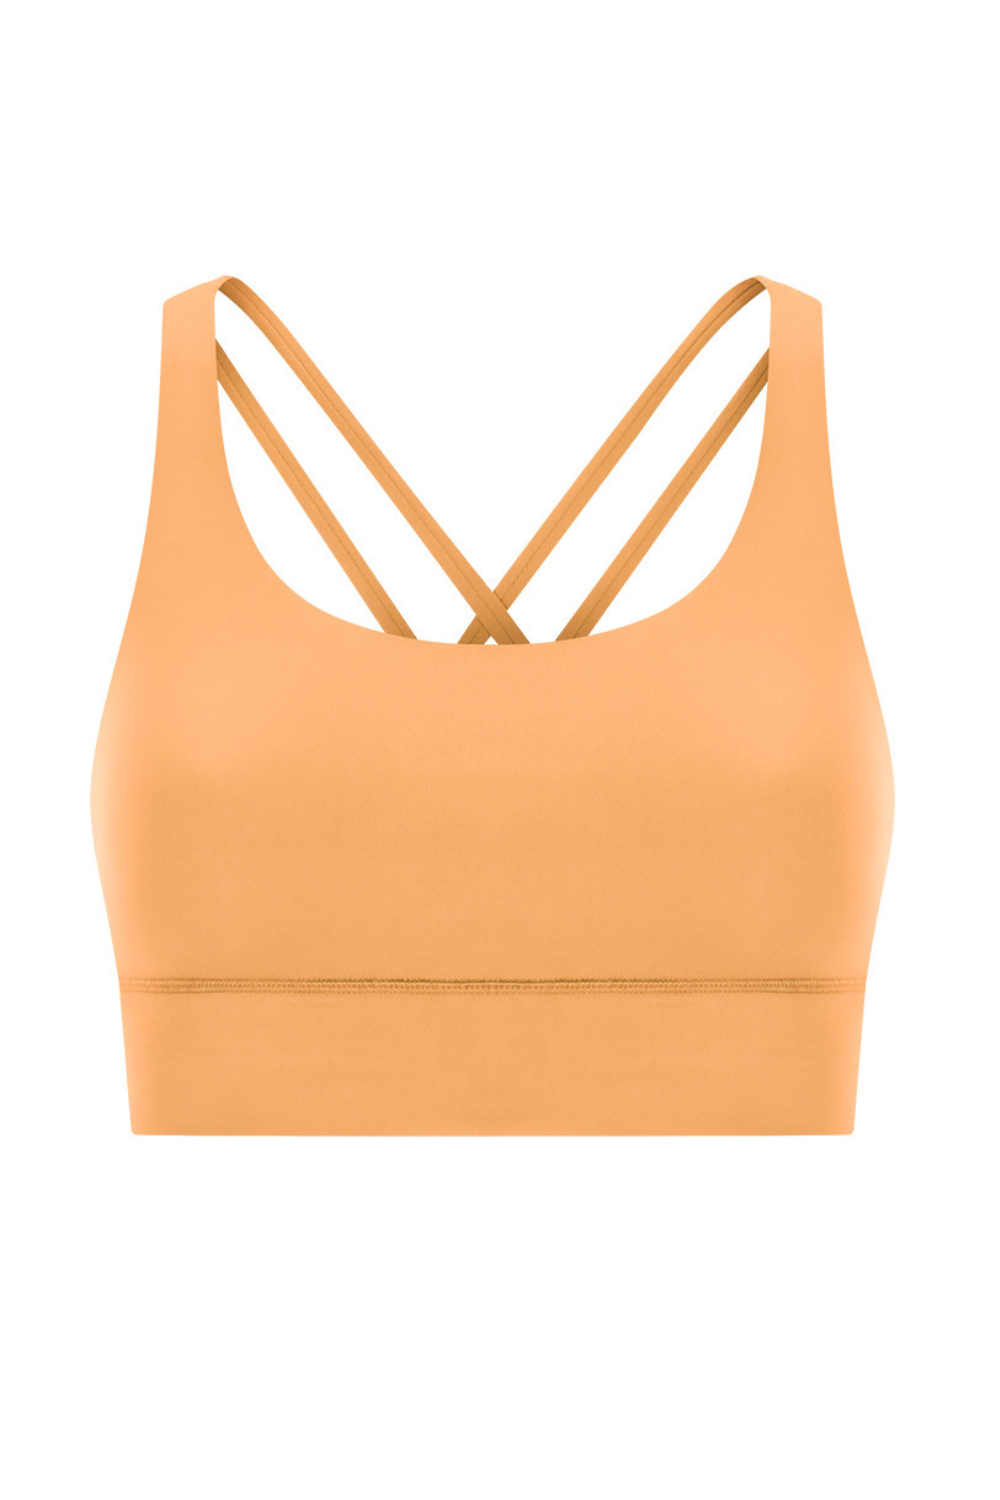 Navalora Fit Amelia Strappy Bra with Removable Pads in Tangerine